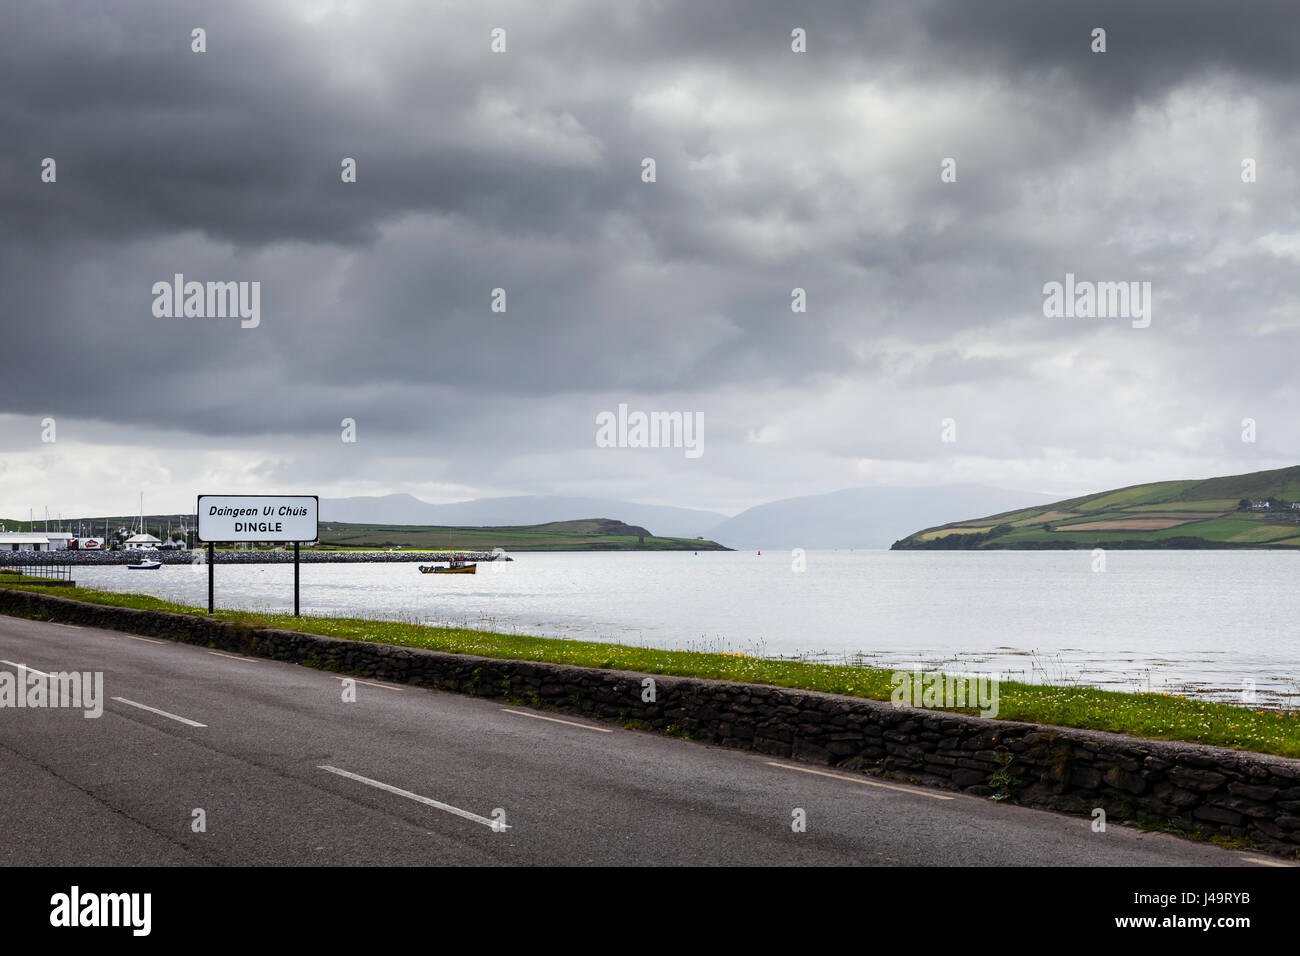 Dingle, County Kerry, Ireland - The entrance of the town of Dingle (Daingean ui Chuis,) on a dark and cloudy day. Stock Photo